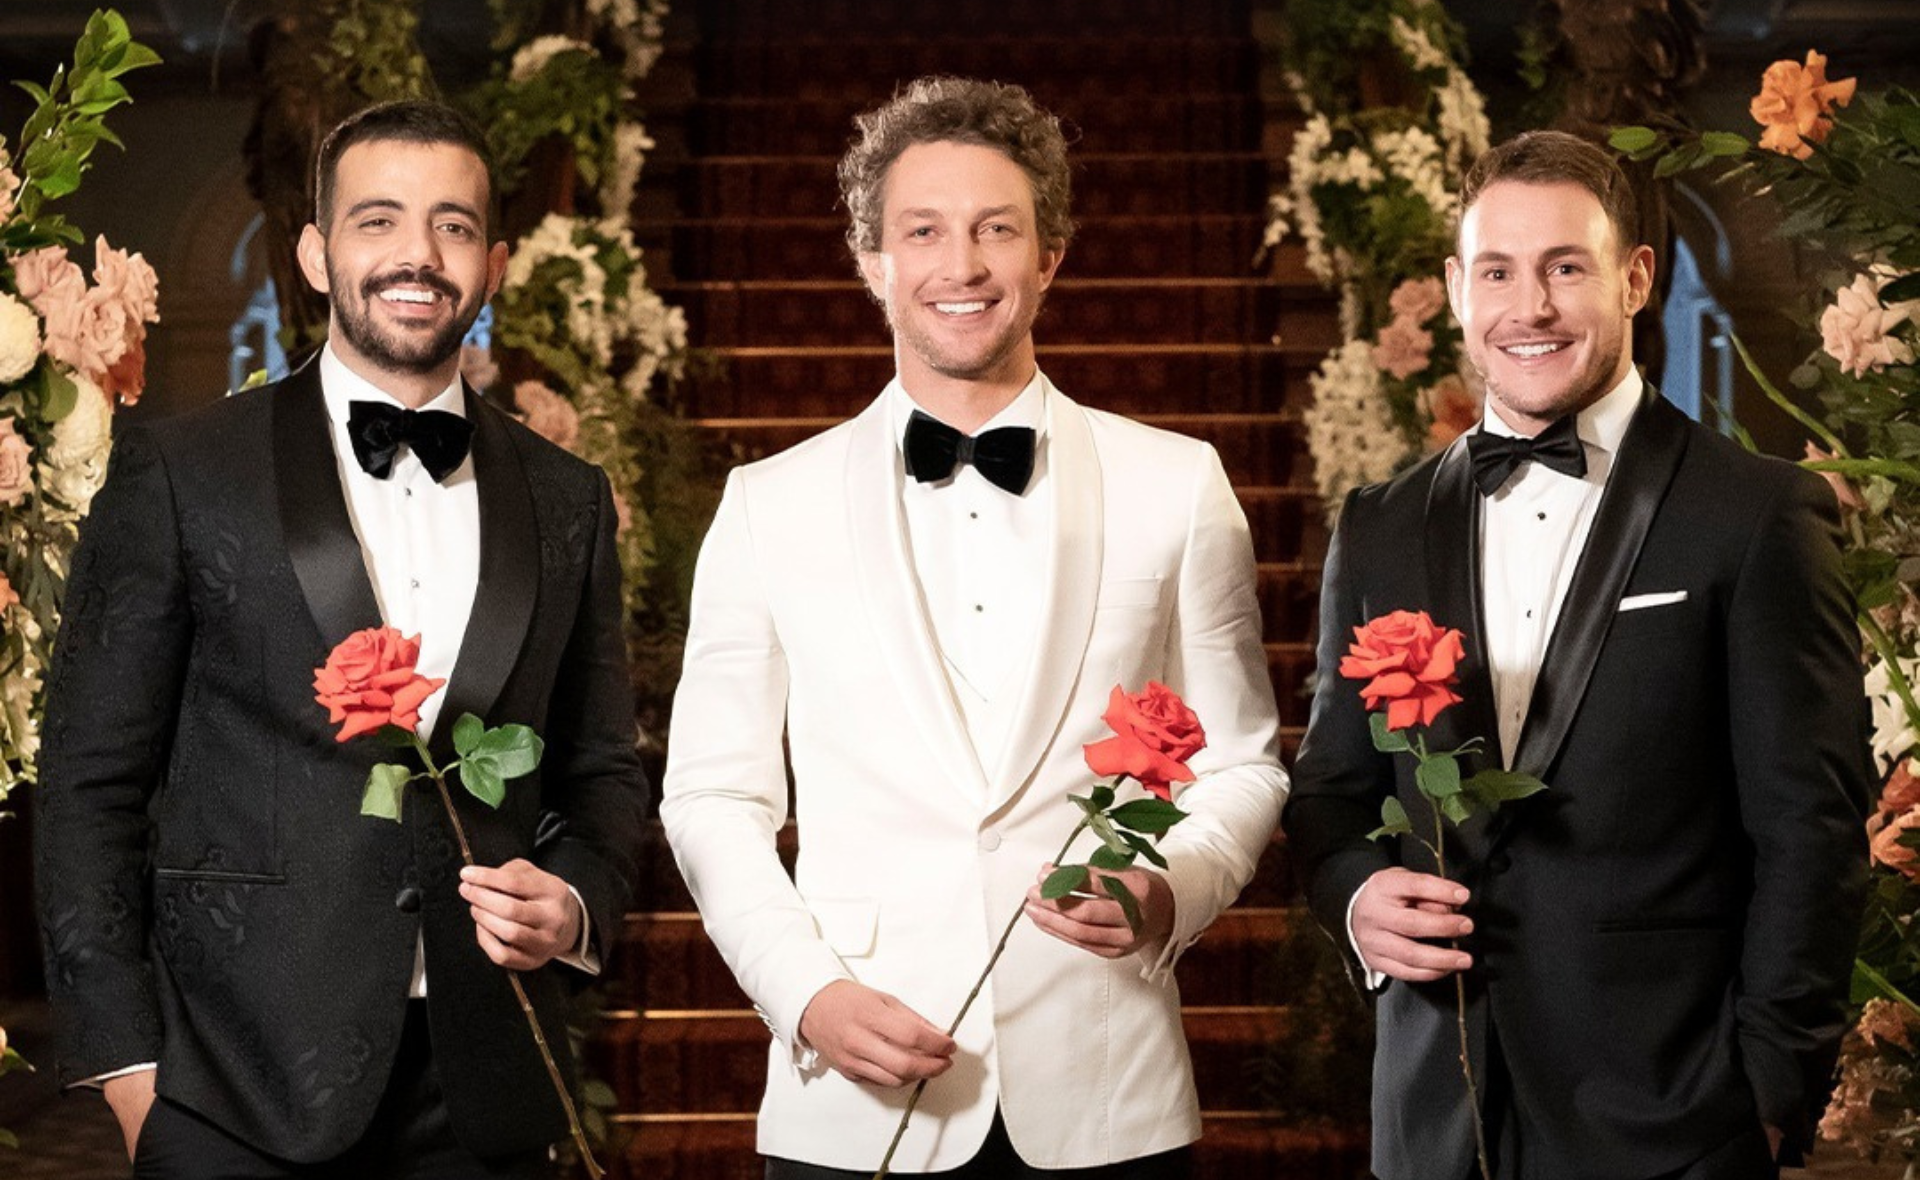 Who has stolen The Bachelors hearts? Fans believe they know who will win the 2023 season